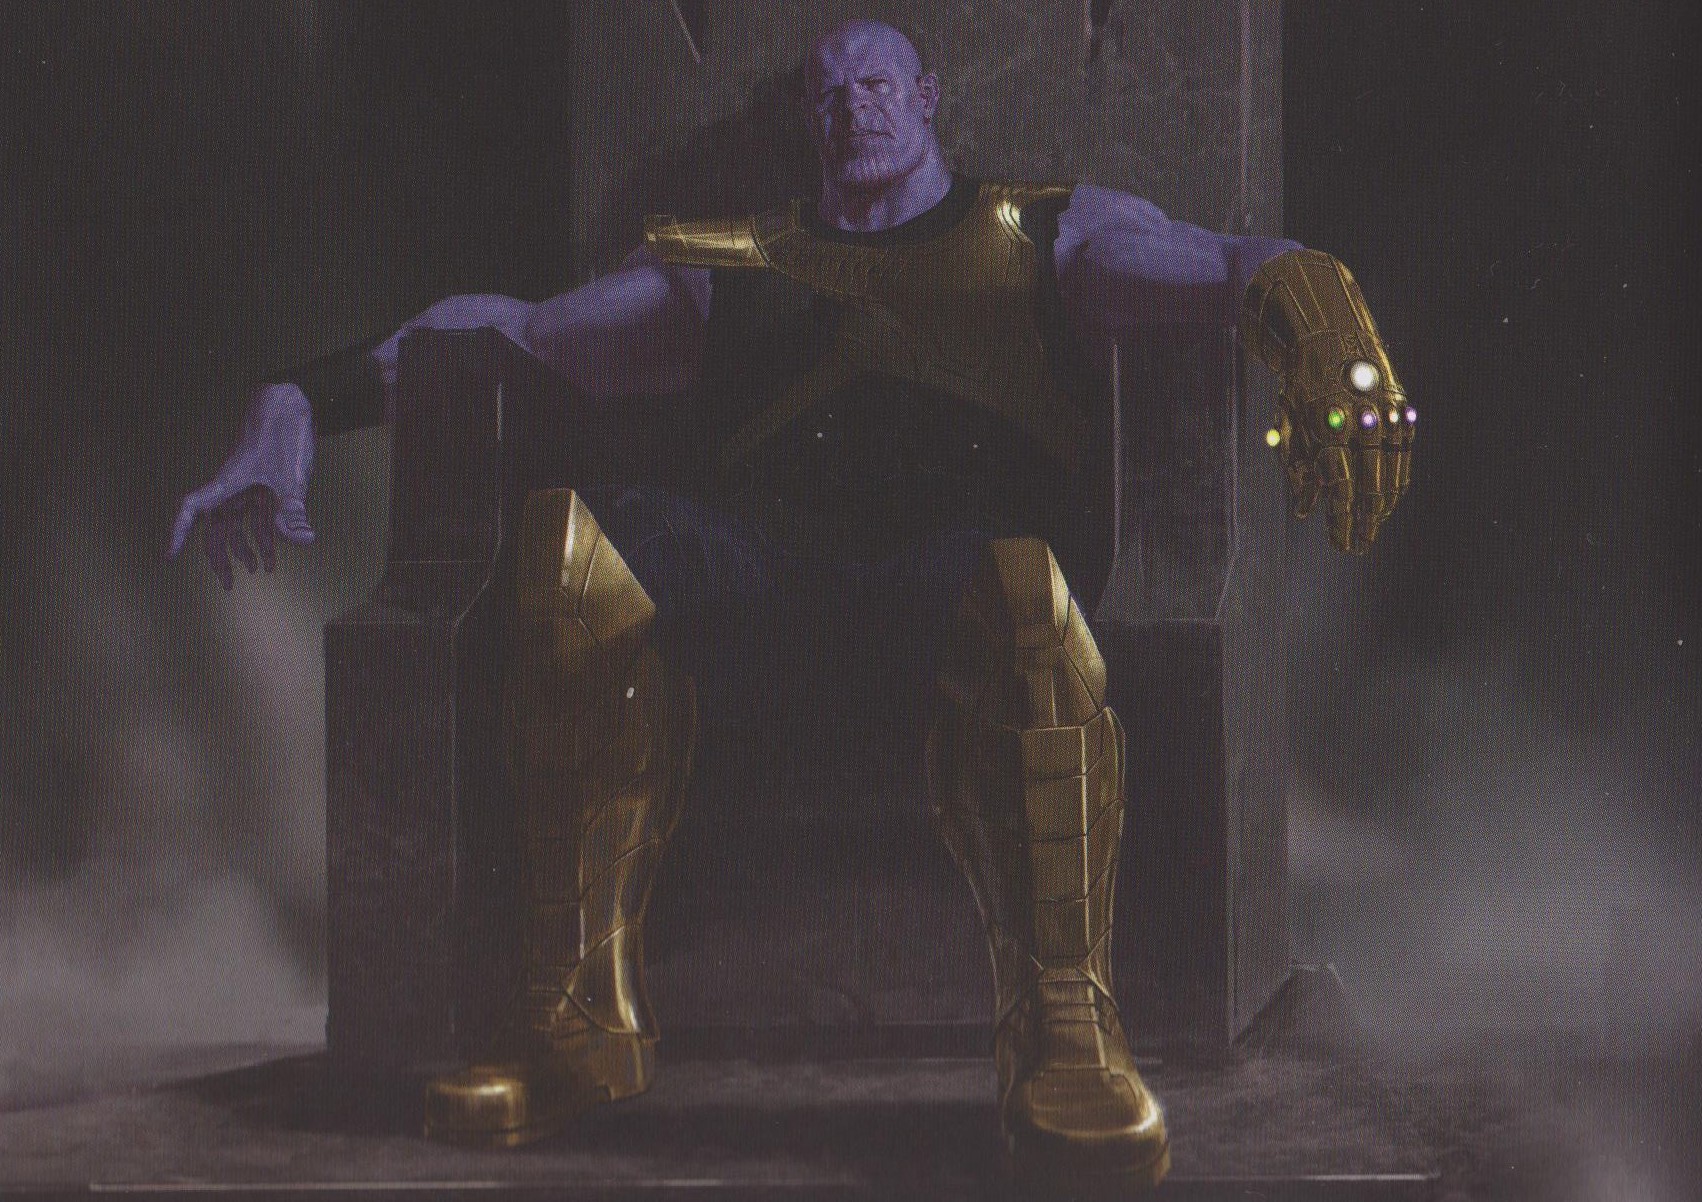 Josh Brolin's Thanos has been described as "thicc" by some c...